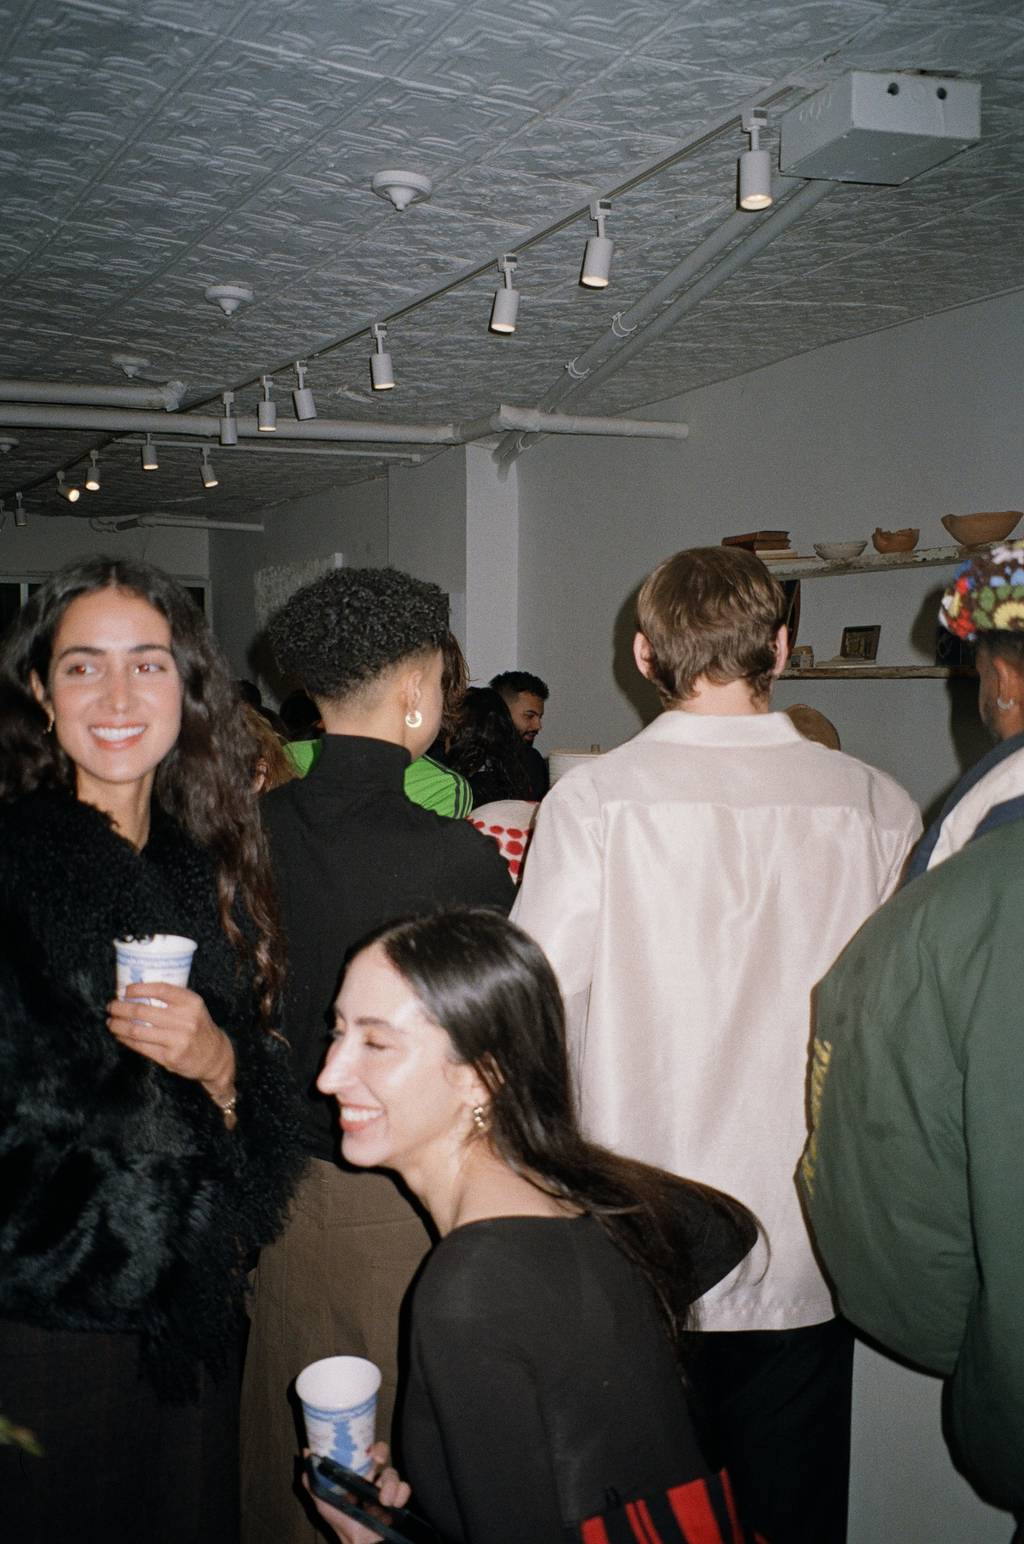 The winter issue of Laura Reilly's shopping newsletter, Magasin, was celebrated with a party on the Lower East Side of Manhattan.